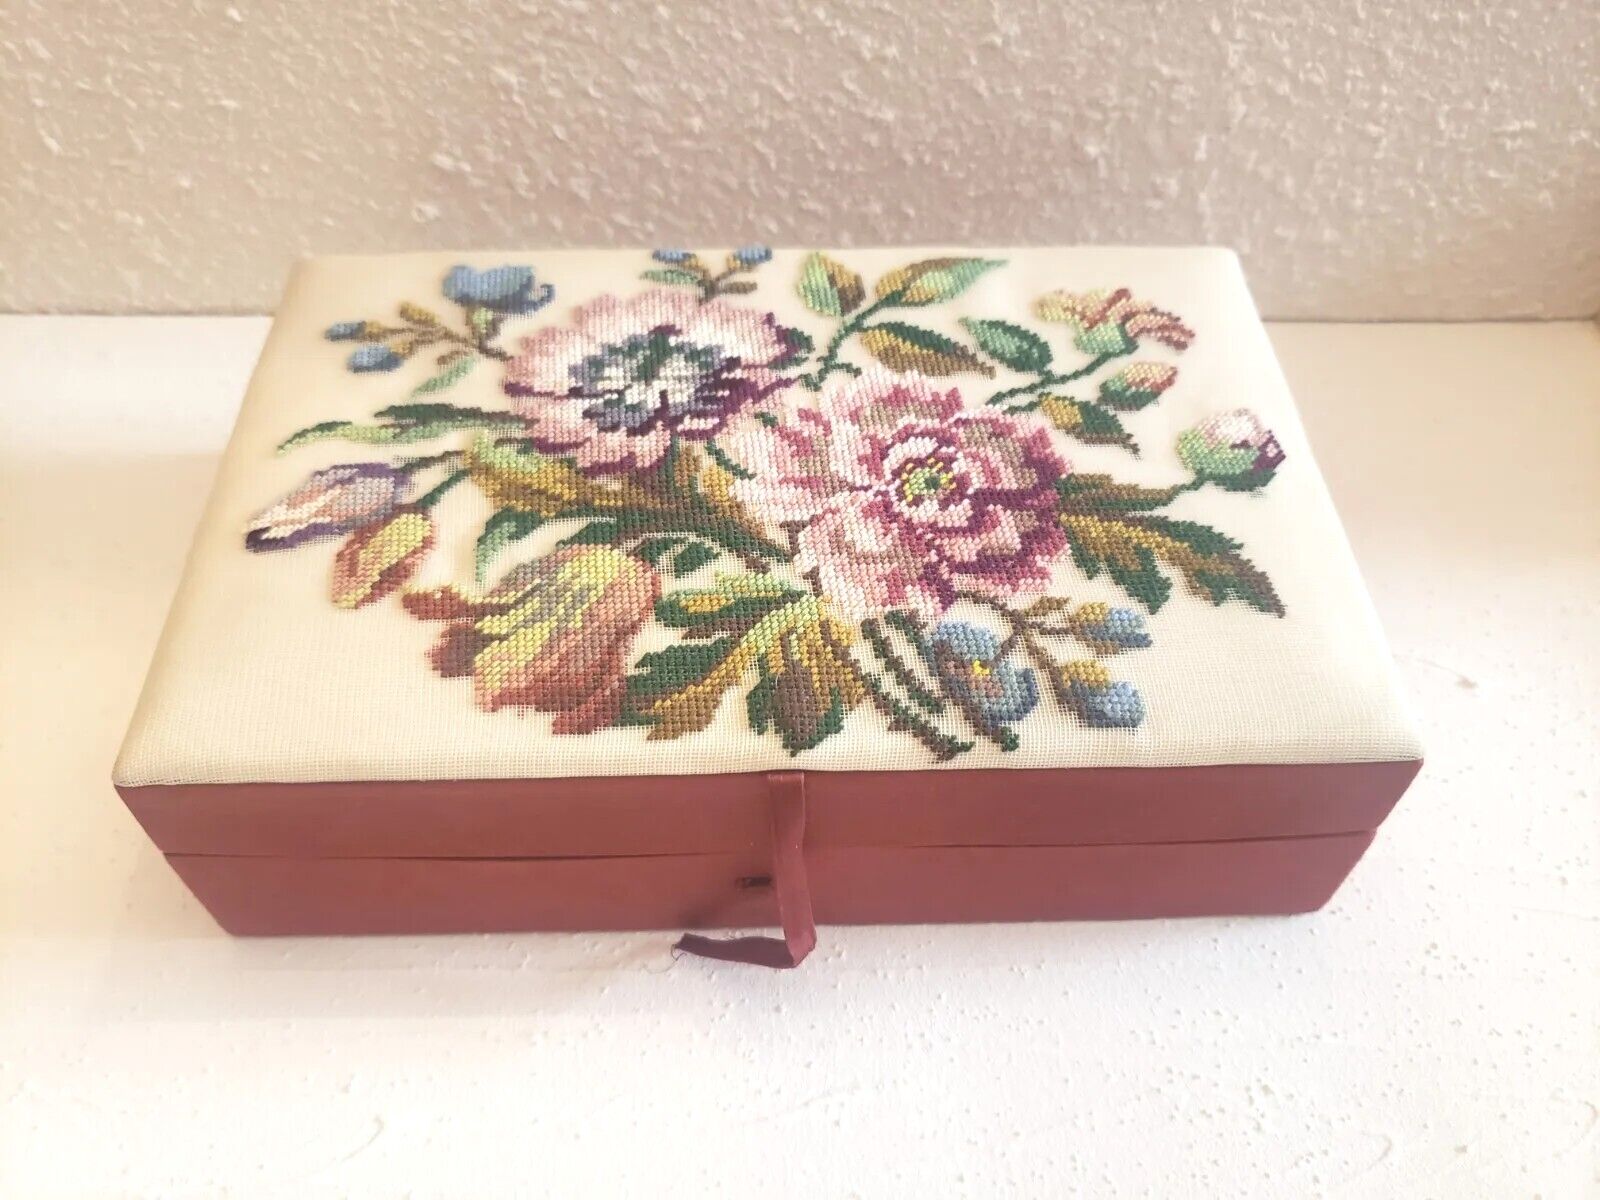 VTG Fetco Needle Point Jewelry/Trinket Box Memories Satin Padded Floral Embroid